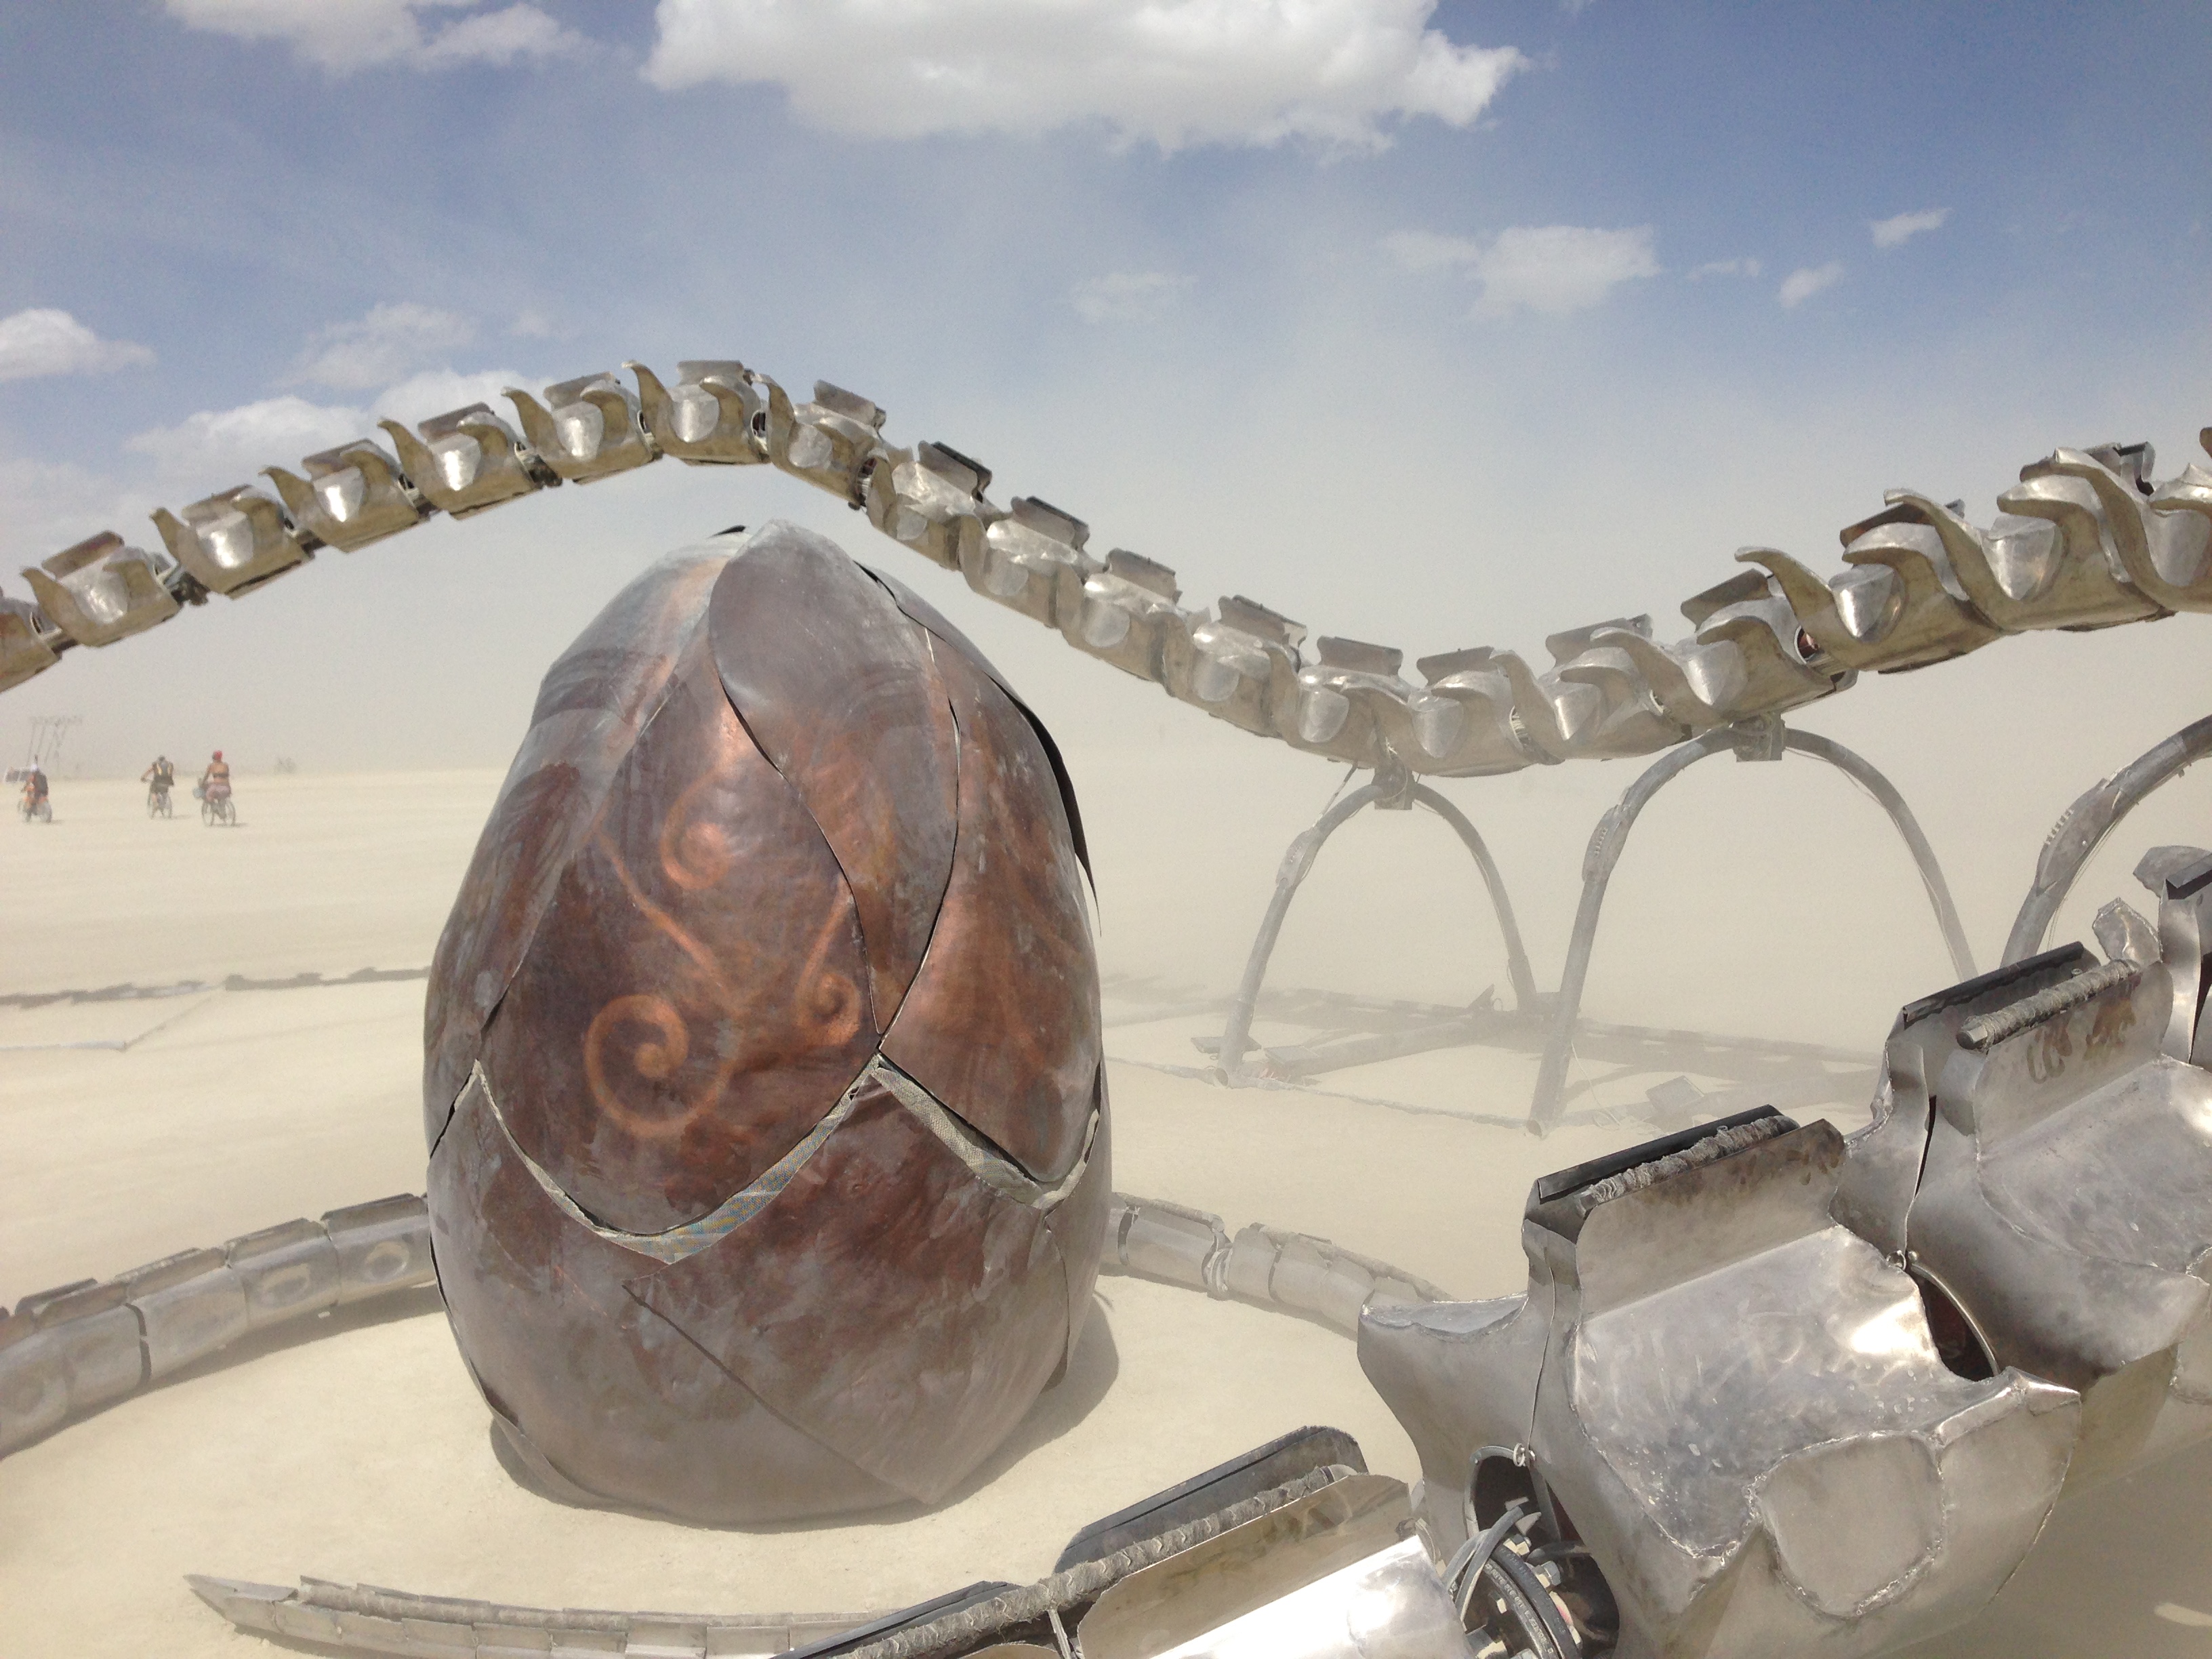 Serpent Mother's egg.  What is she hiding/protecting in there?